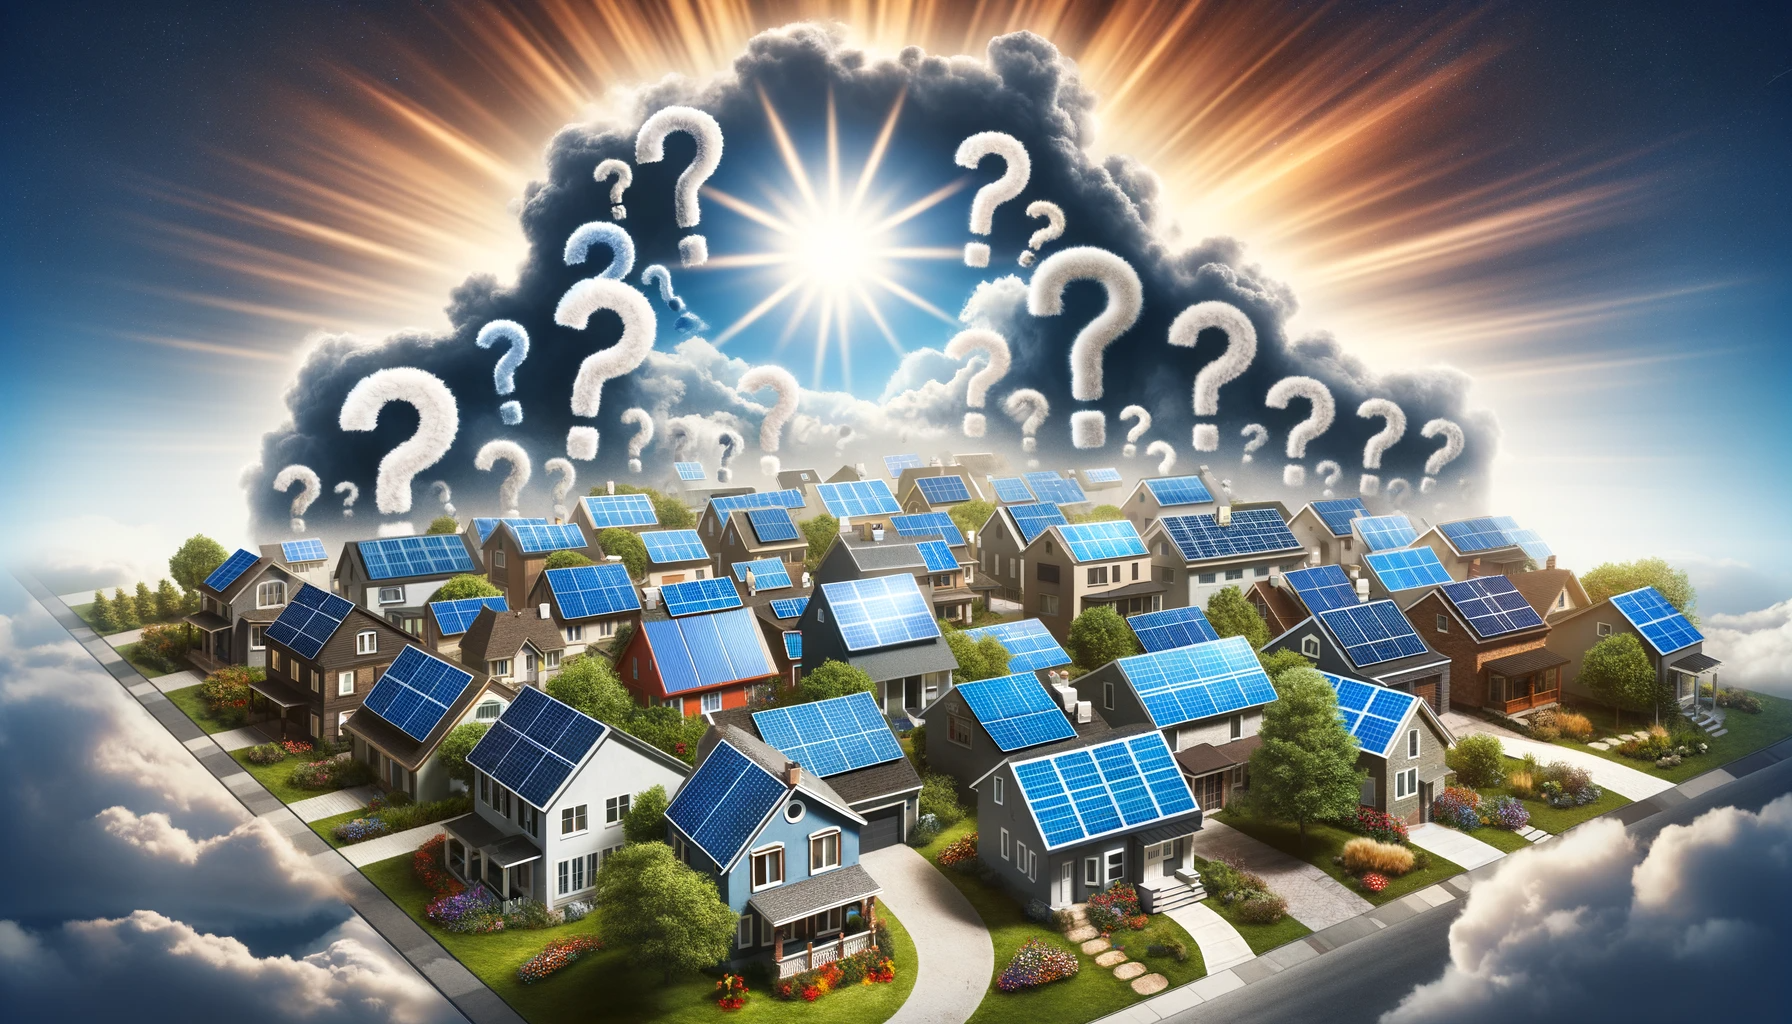 depiction of solar questions answered